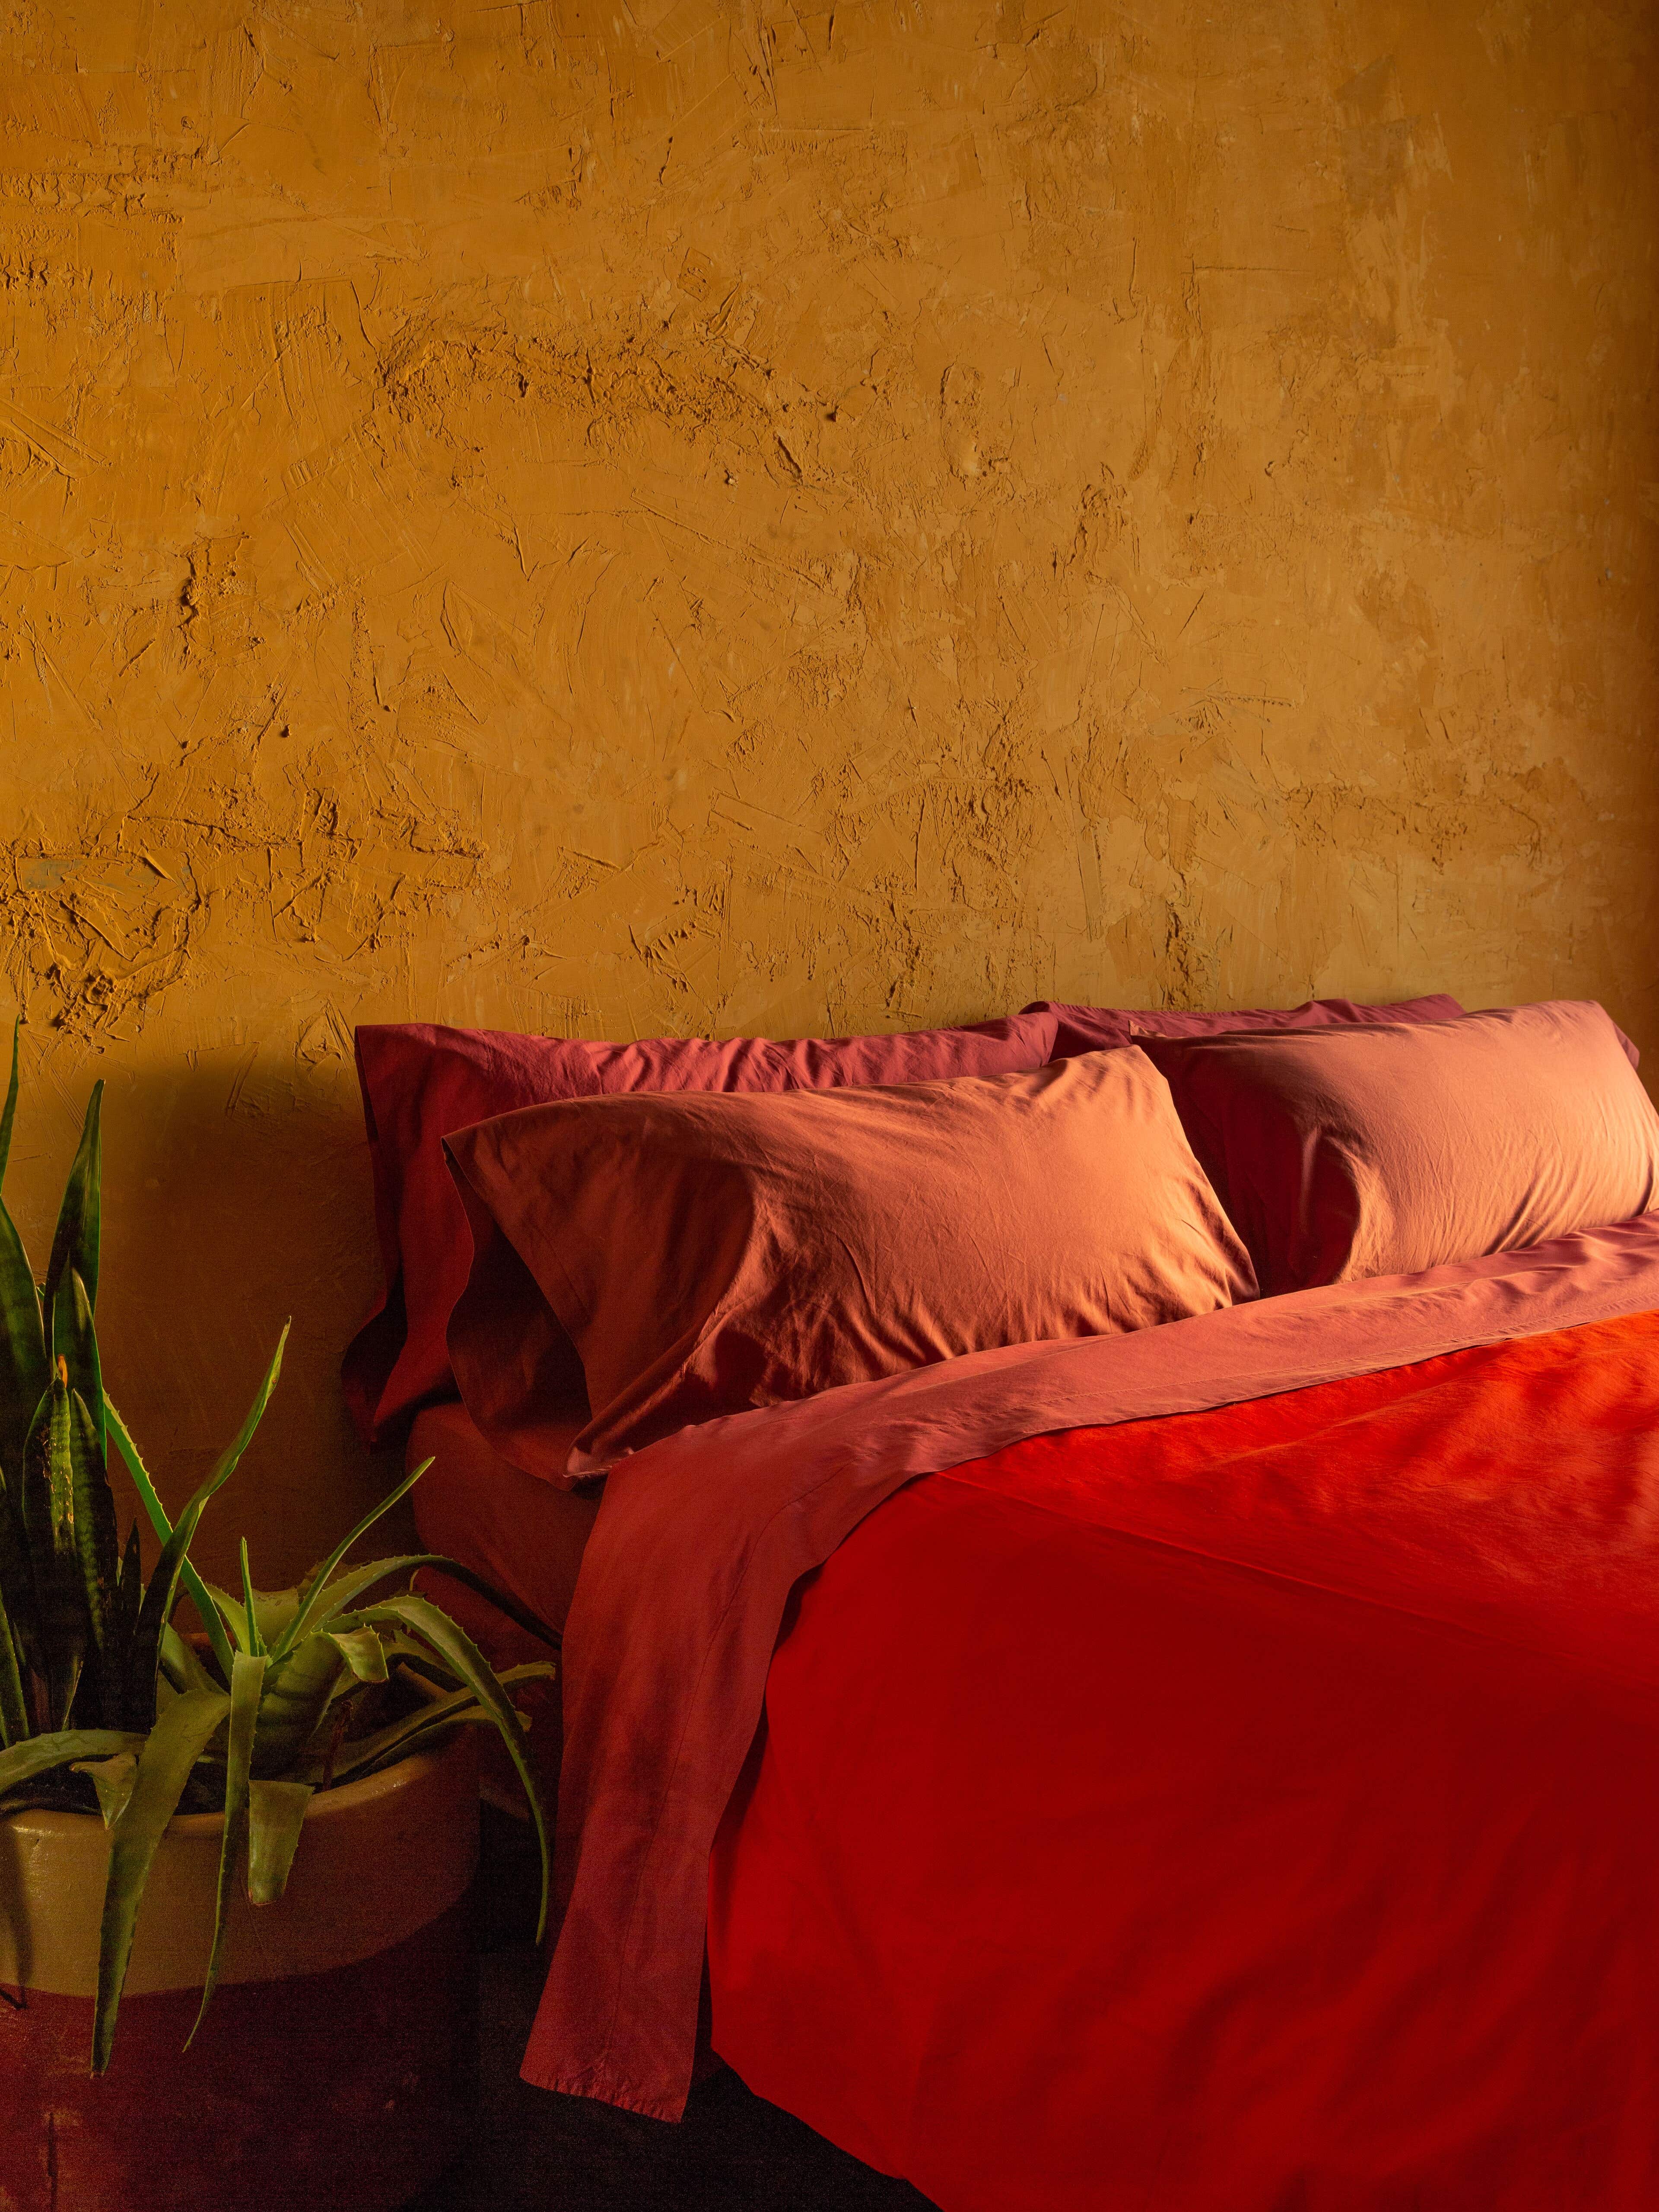 Colorful Sheets I’d Ditch My All-White Bedding For